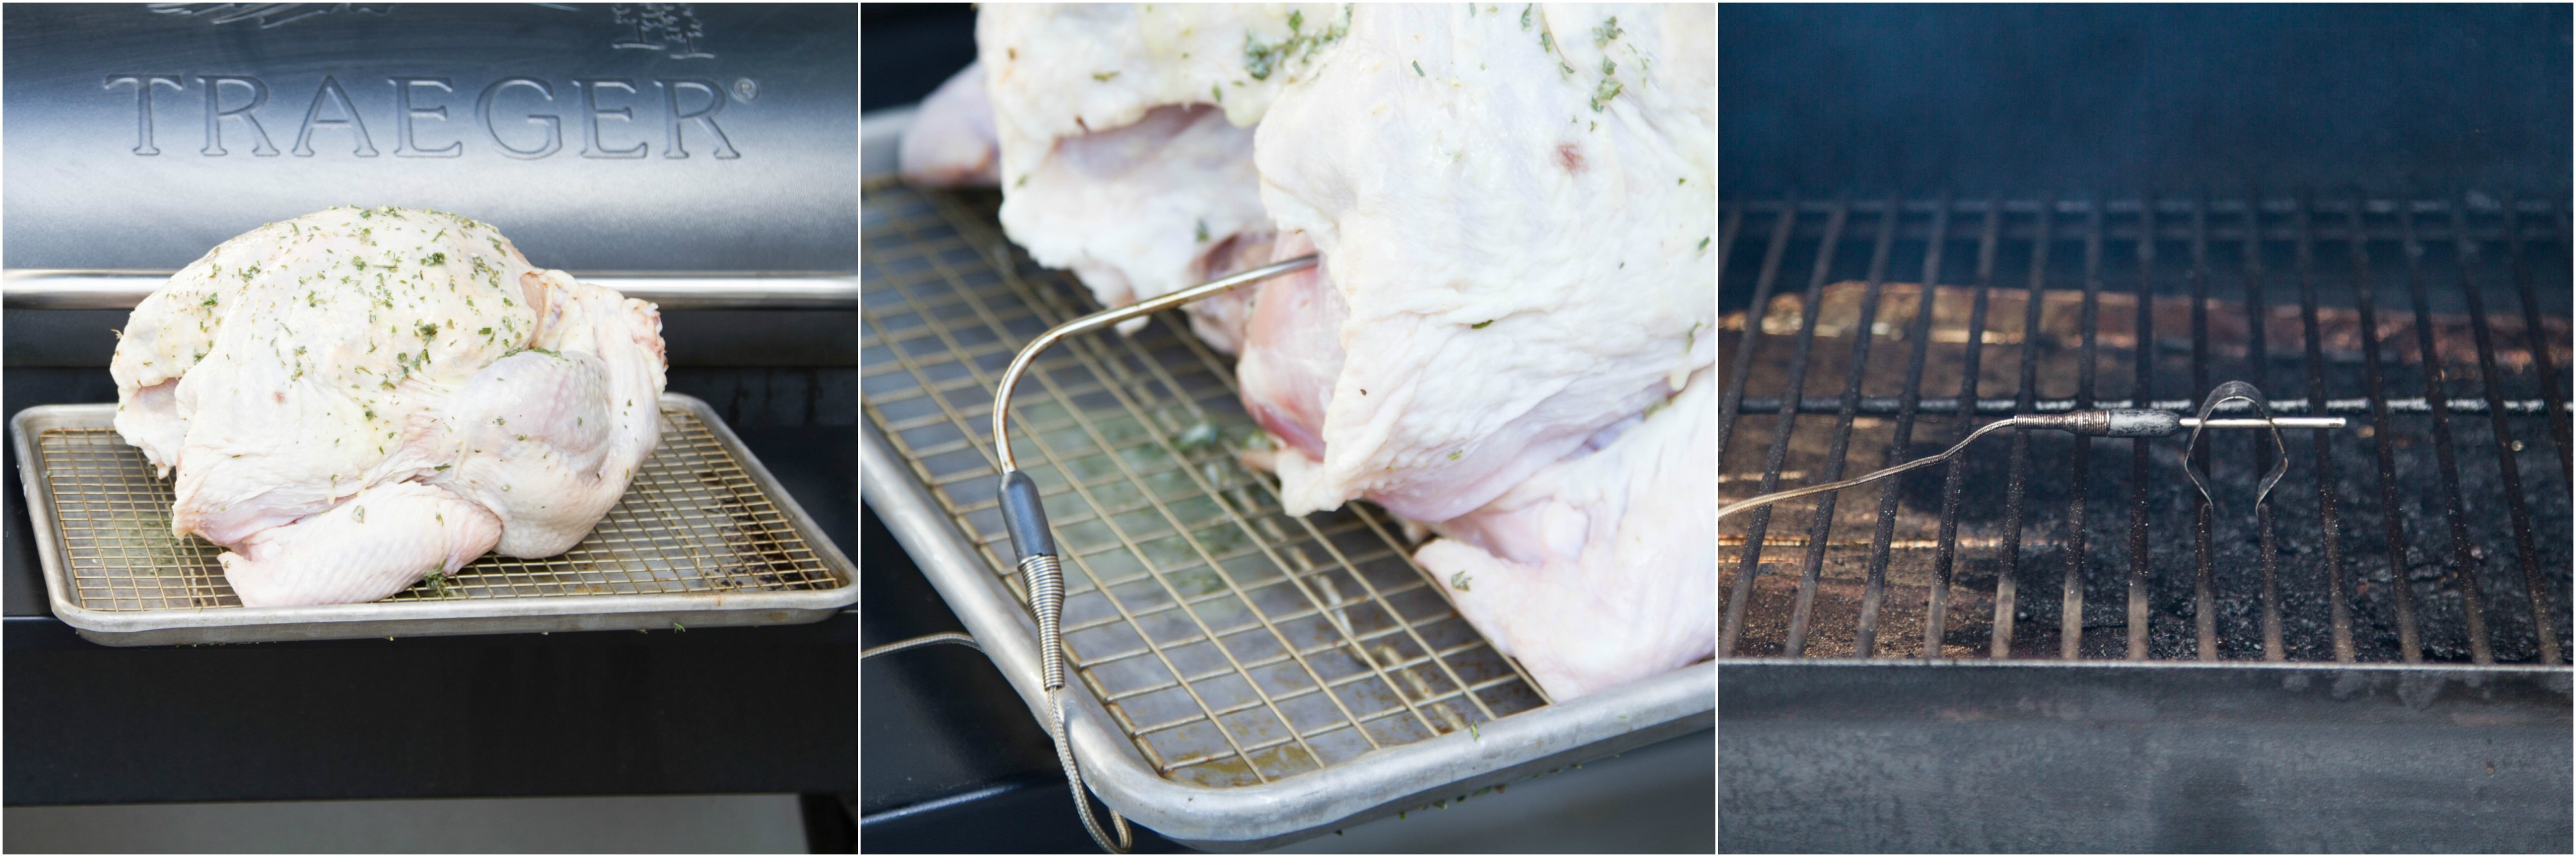 use a penetration probe and an air probe to monitor your cook